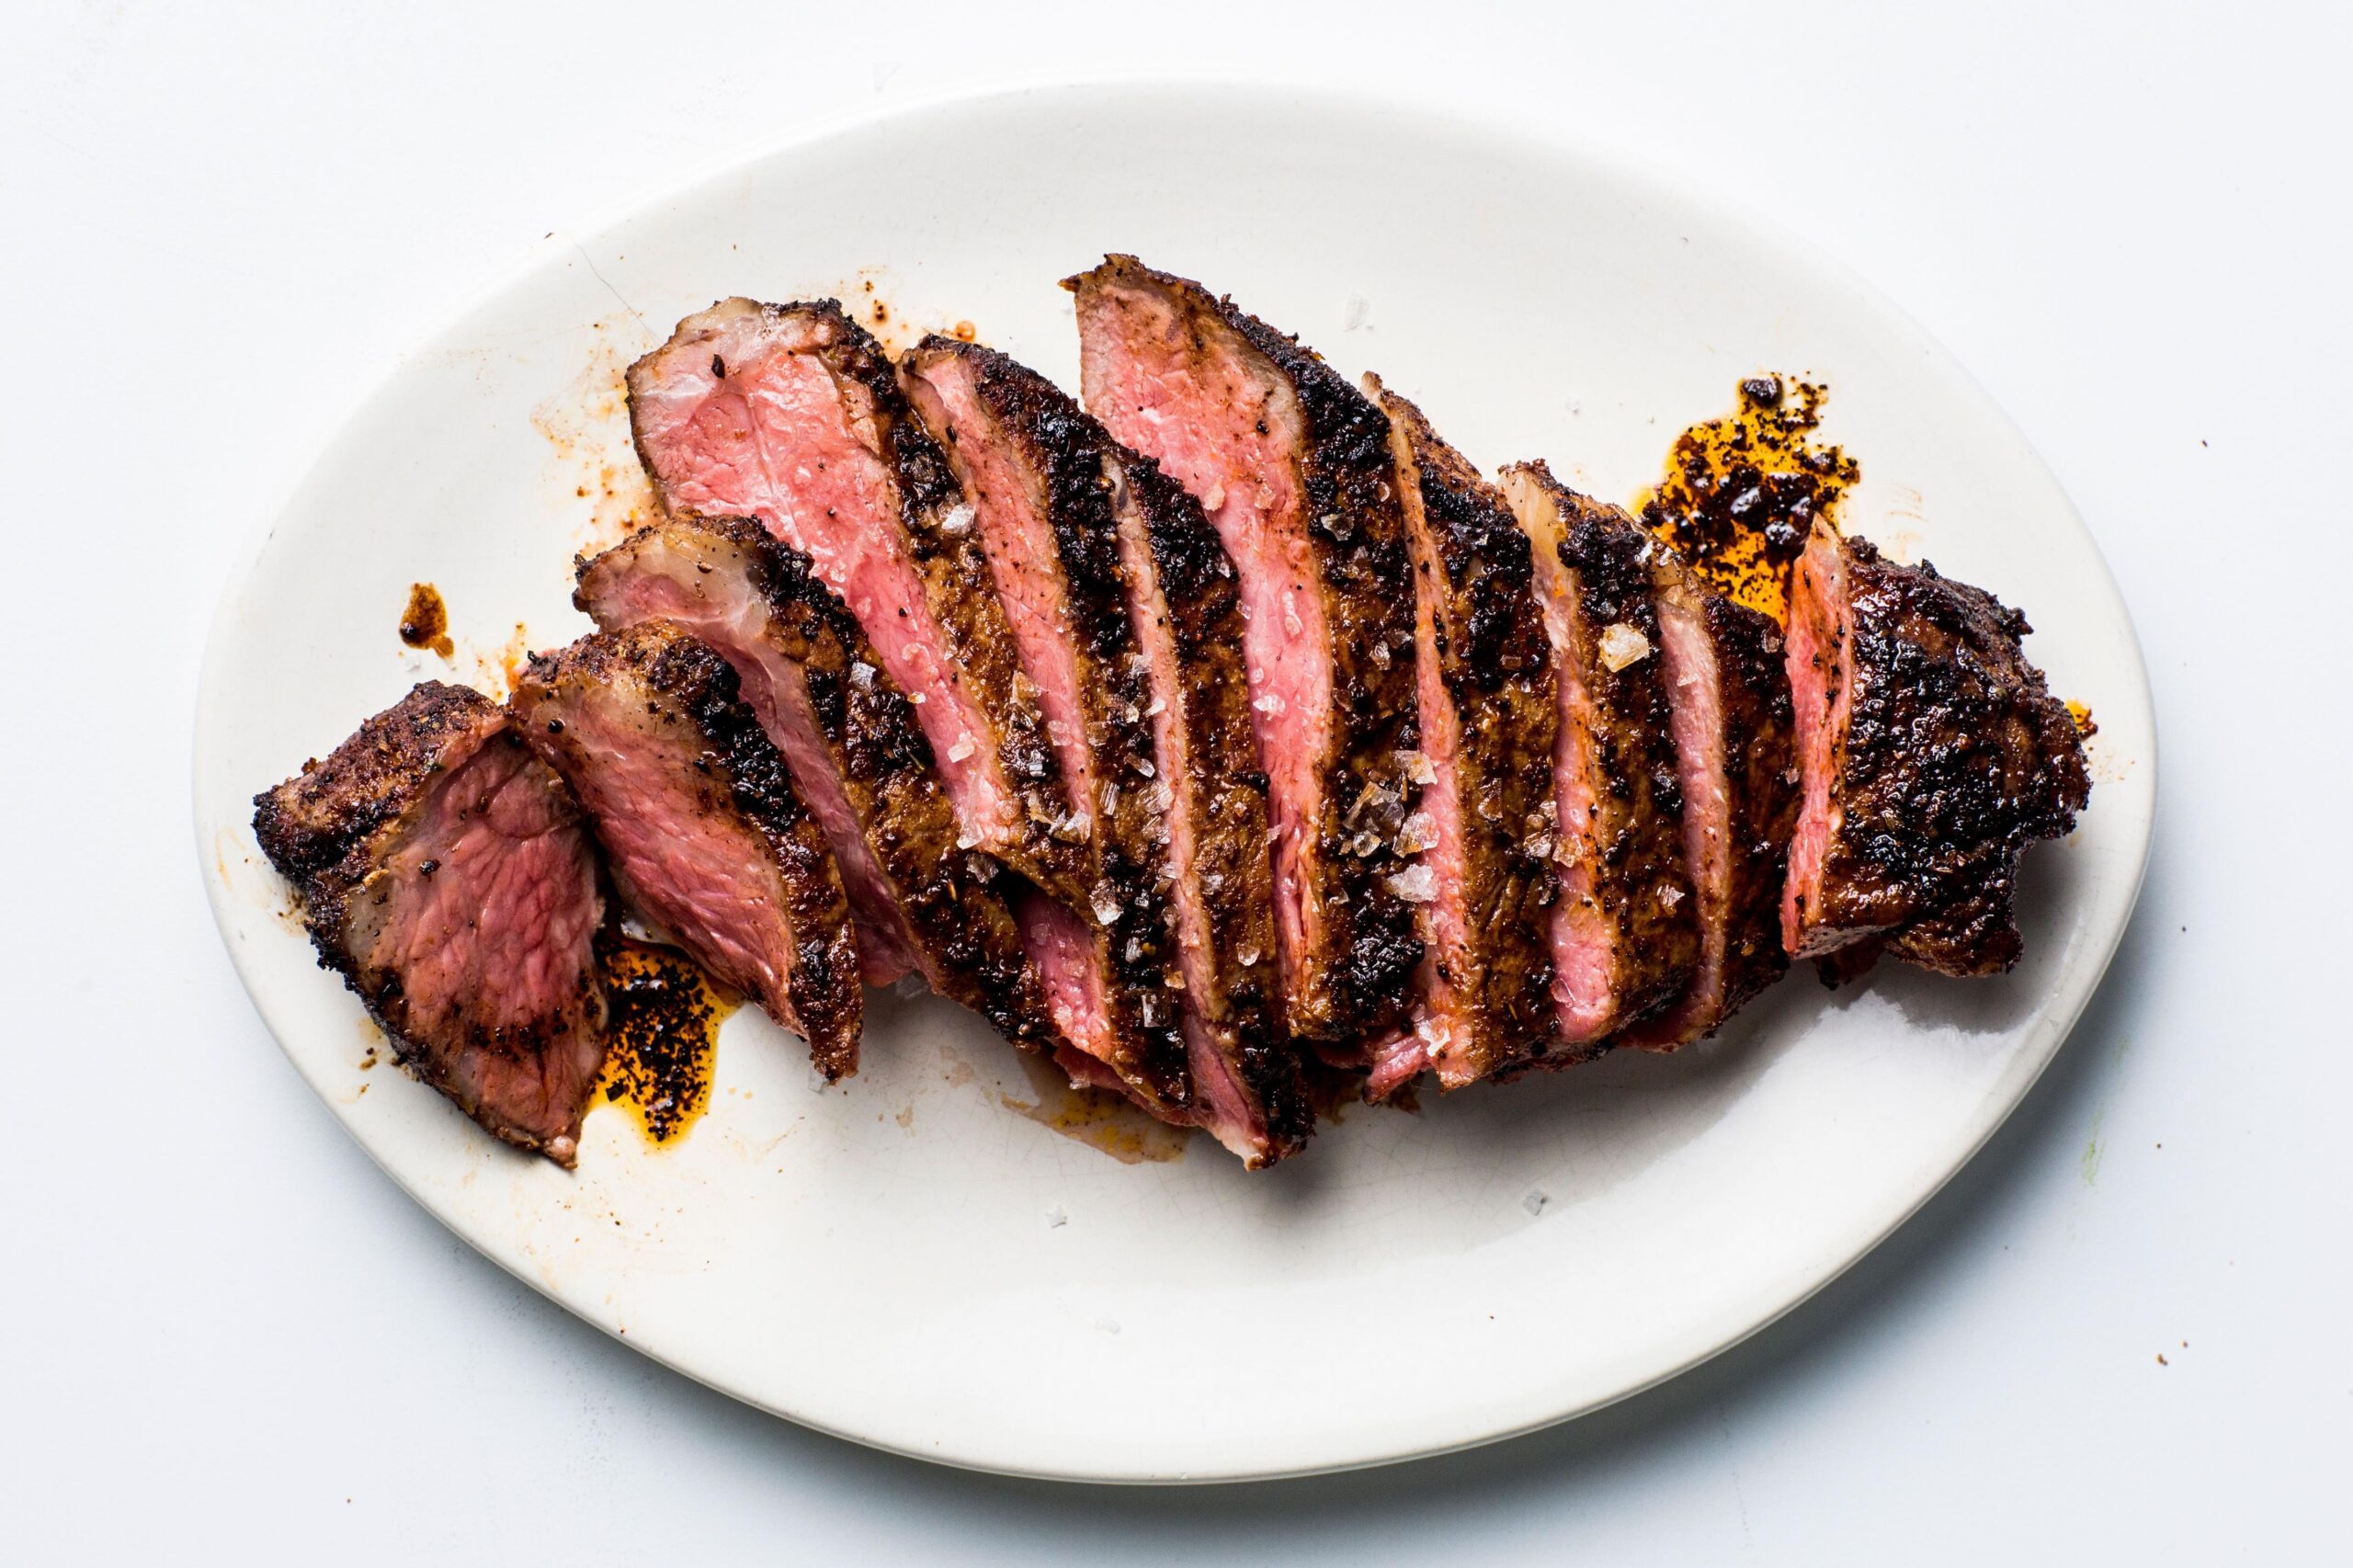  Get ready to rustle up some serious food envy with this drool-worthy cowboy steak.